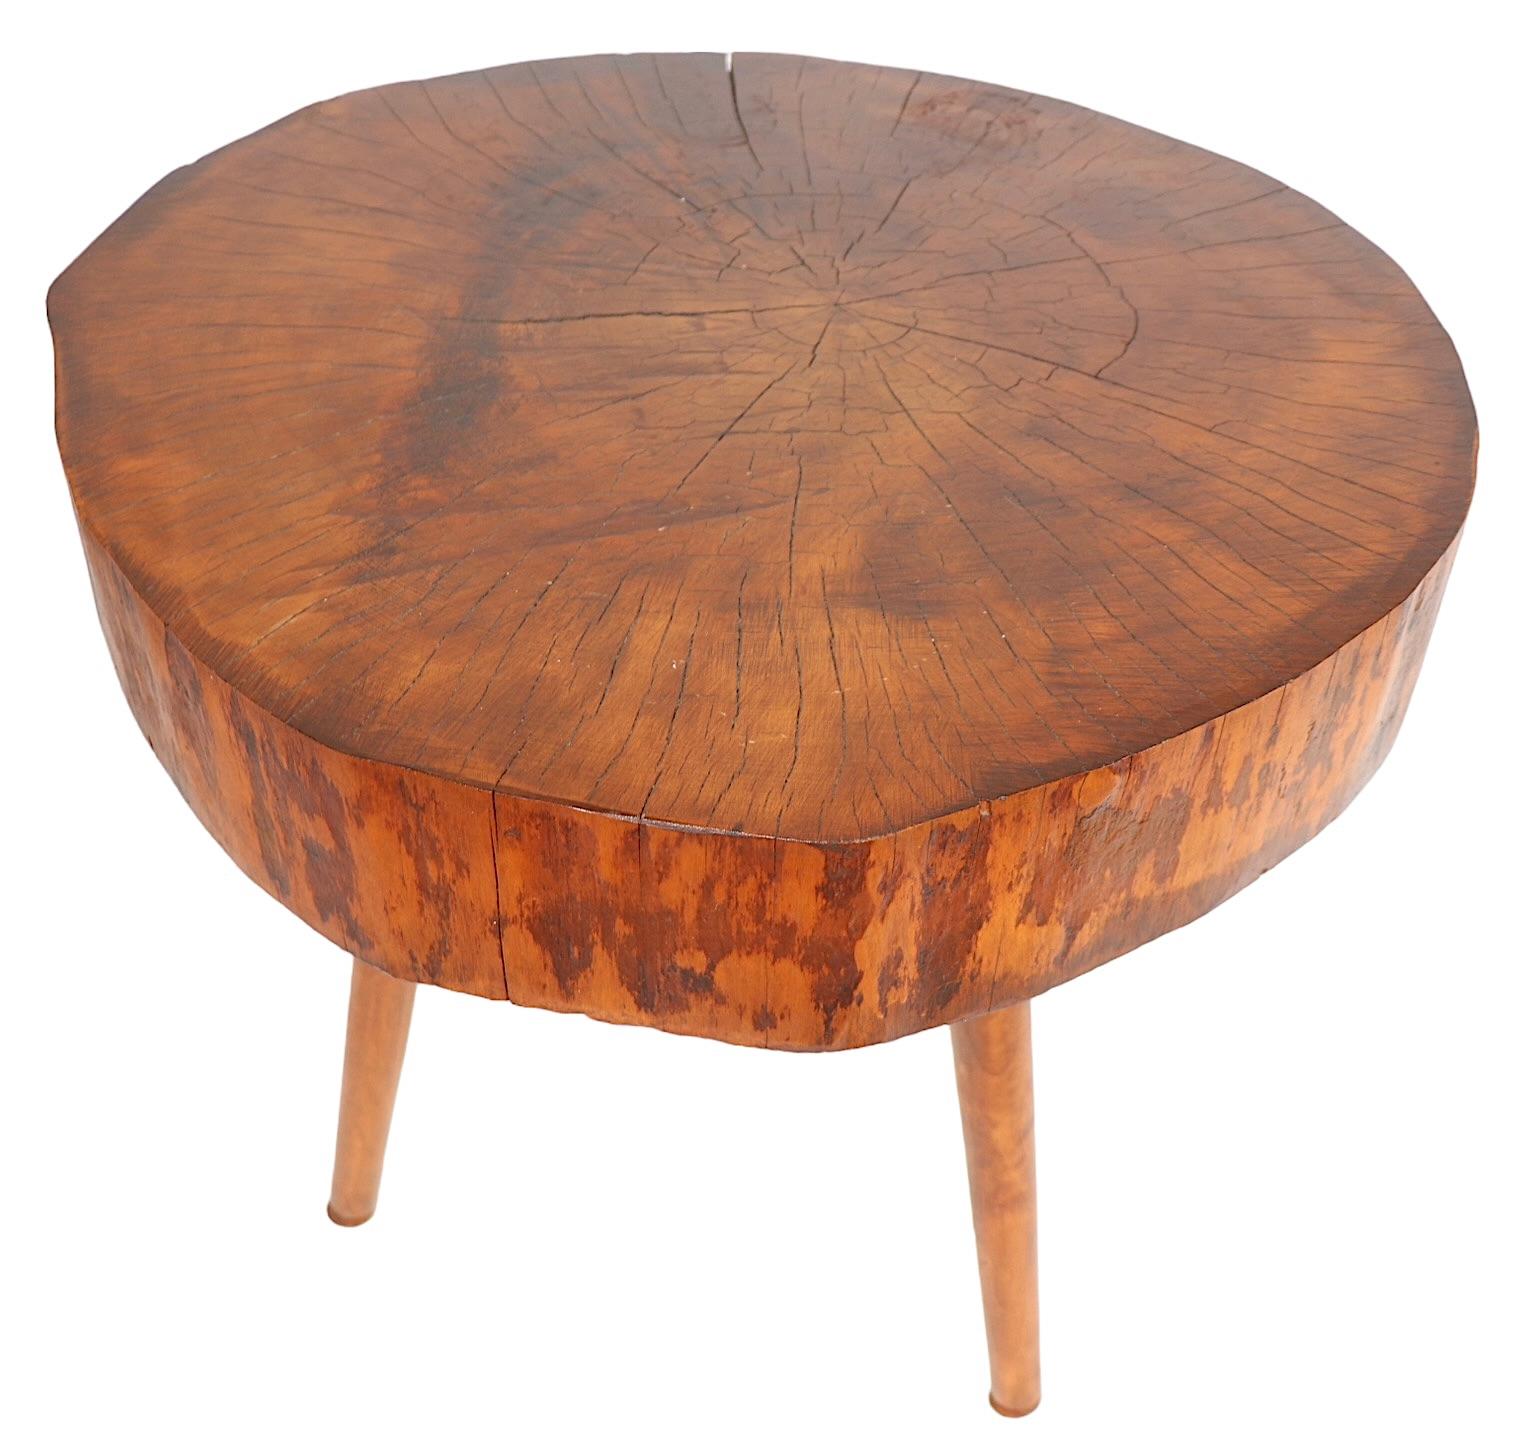 Rustic Adirondack style side, or end table having a thick ( 4 inch ) log top, on three screw in tapered pole legs. The table features a wonderful rich patinated surface, adding to the charm and beauty of this little gem. Made in the USA, circa